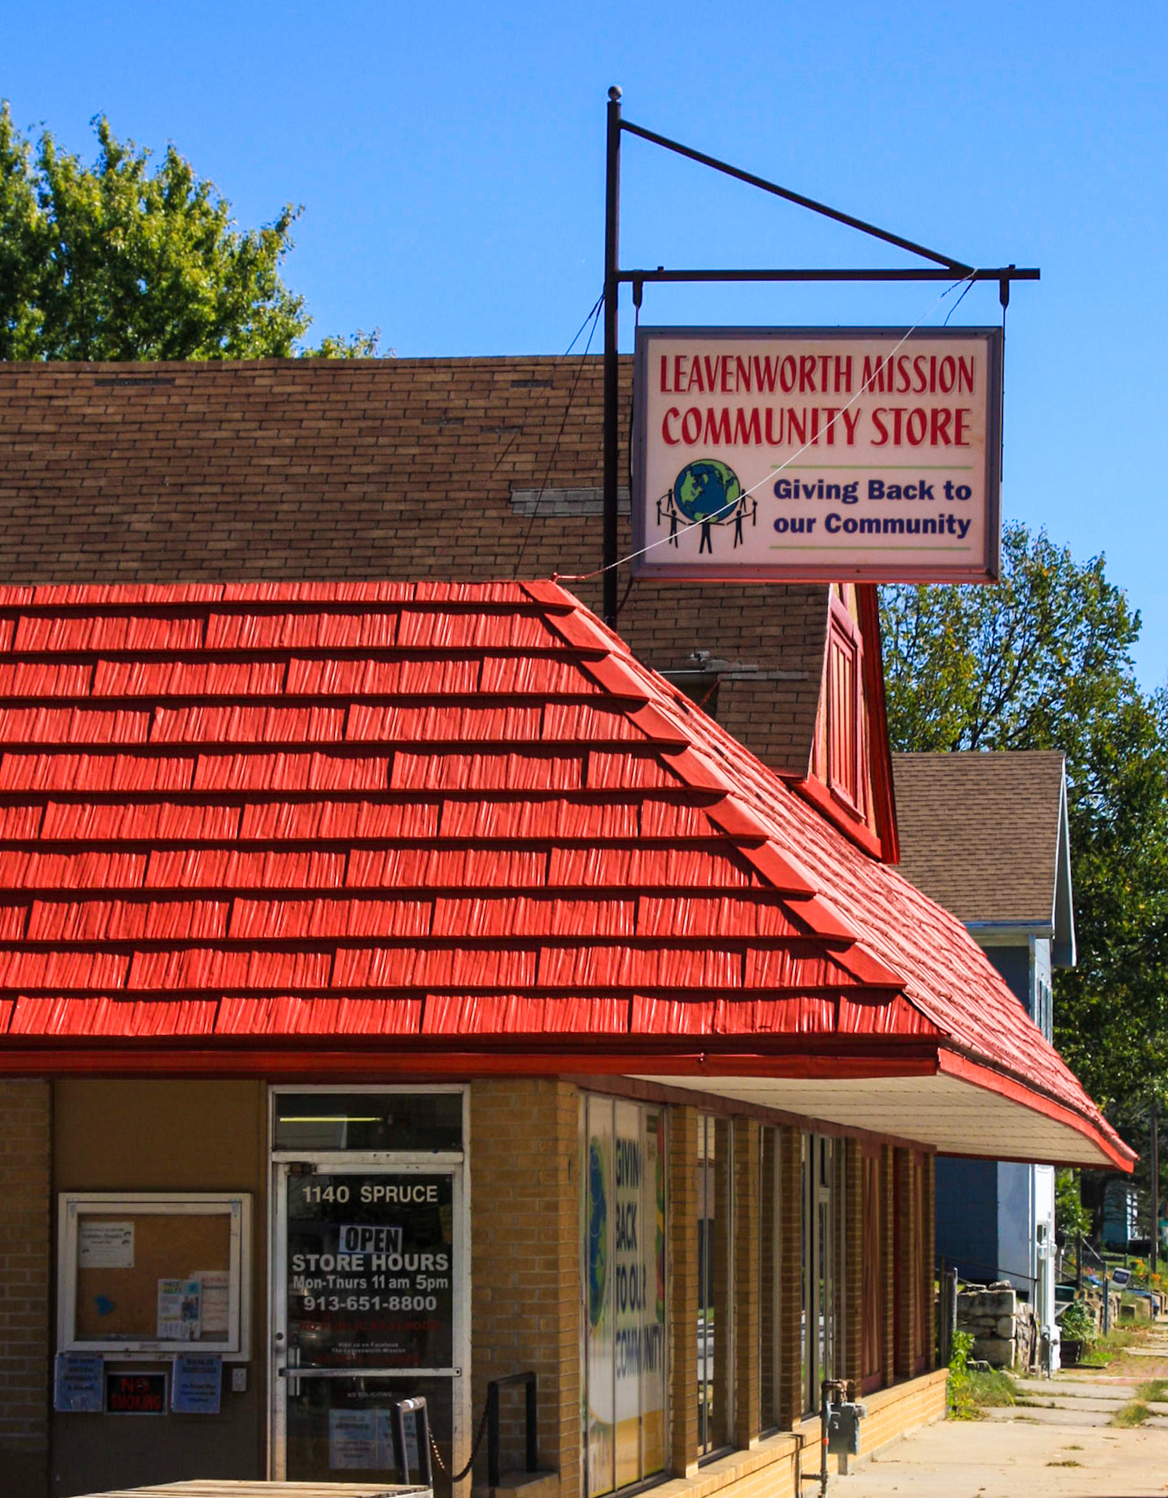 The Leavenworth Mission Community Store and Food Pantry Store Front